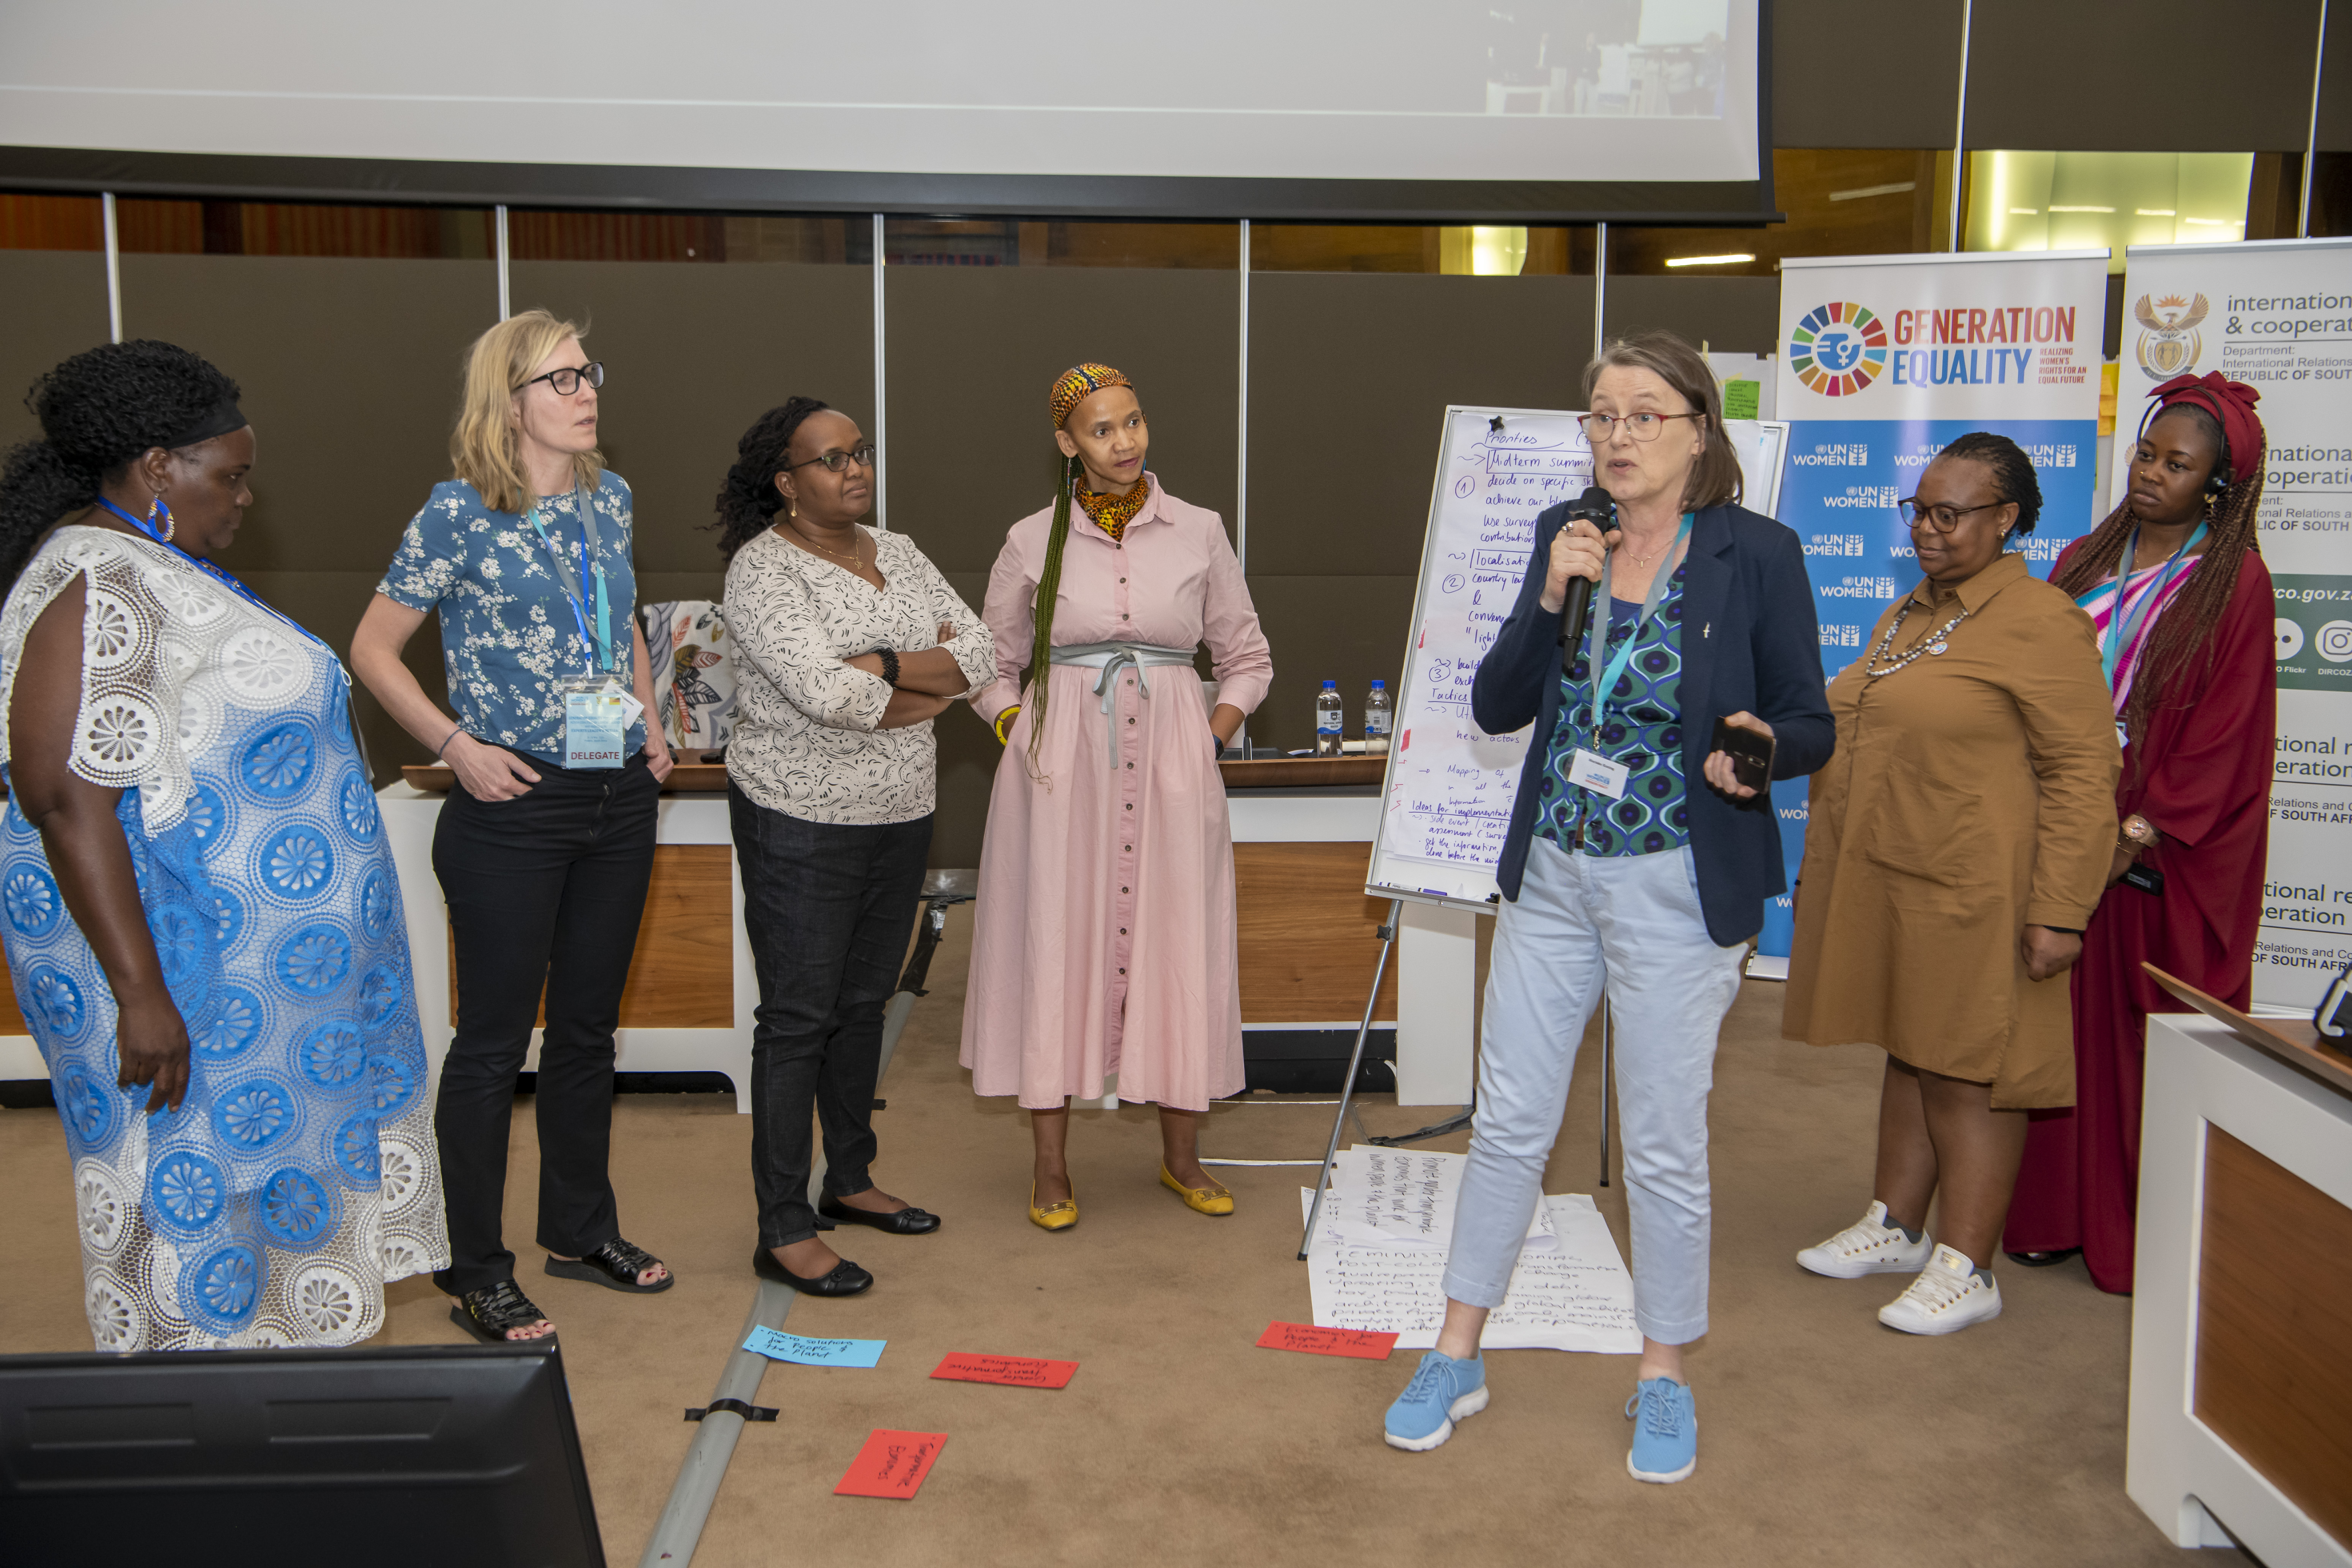  Participants of the Economic Justice Rights Leaders Retreat included participants from governments, the private sector, and civil society organizations from different countries. Photo: UN Women/ Rebecca Hearfield